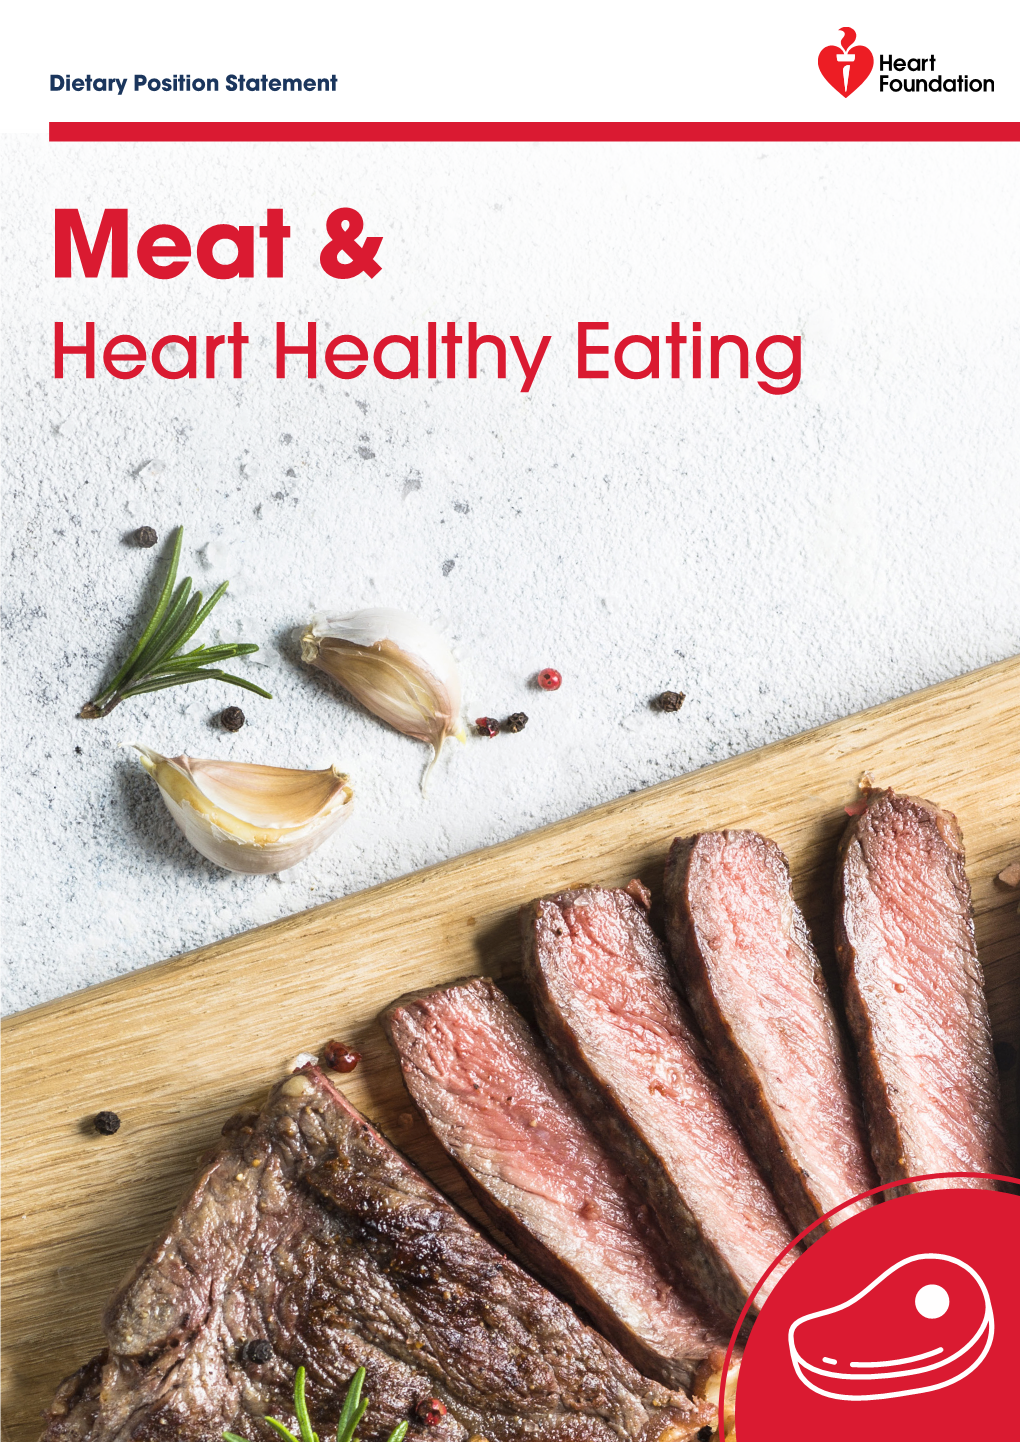 Meat & Heart Healthy Eating